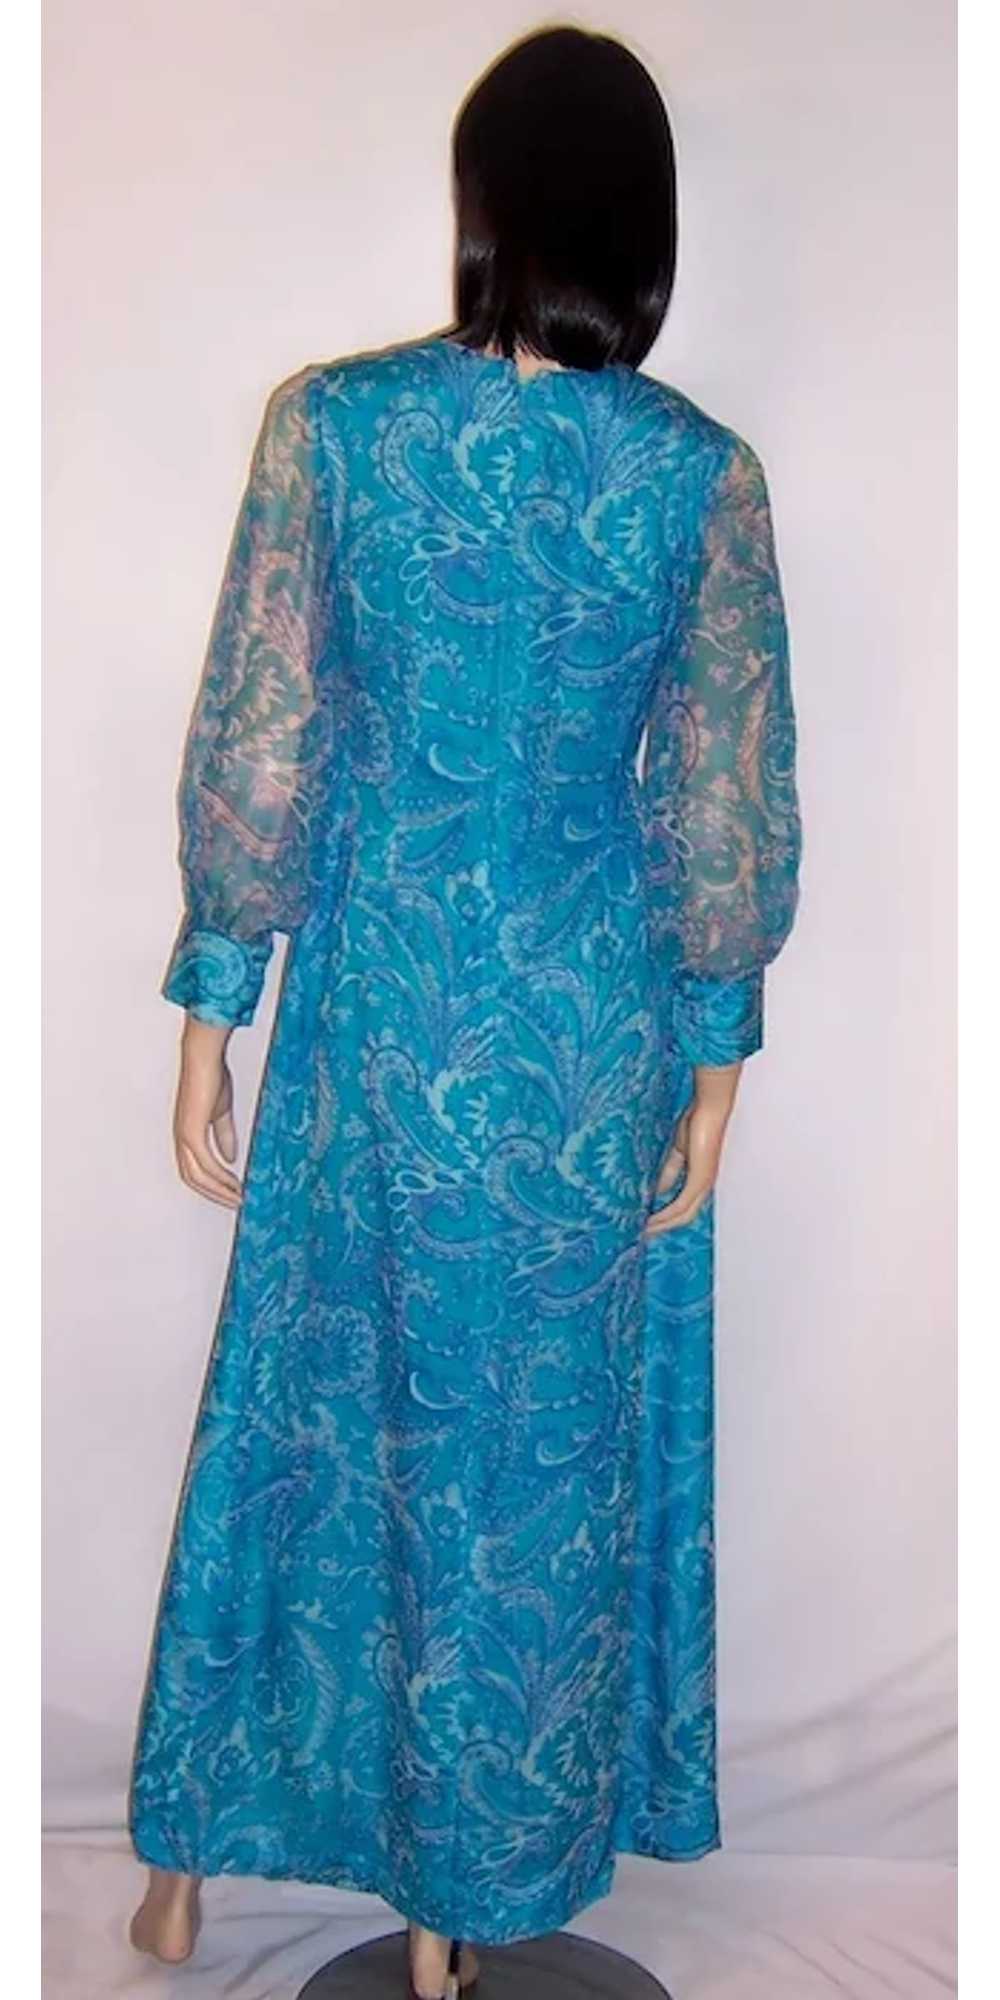 1960's Turquoise Printed Paisley Chiffon Gown - image 3